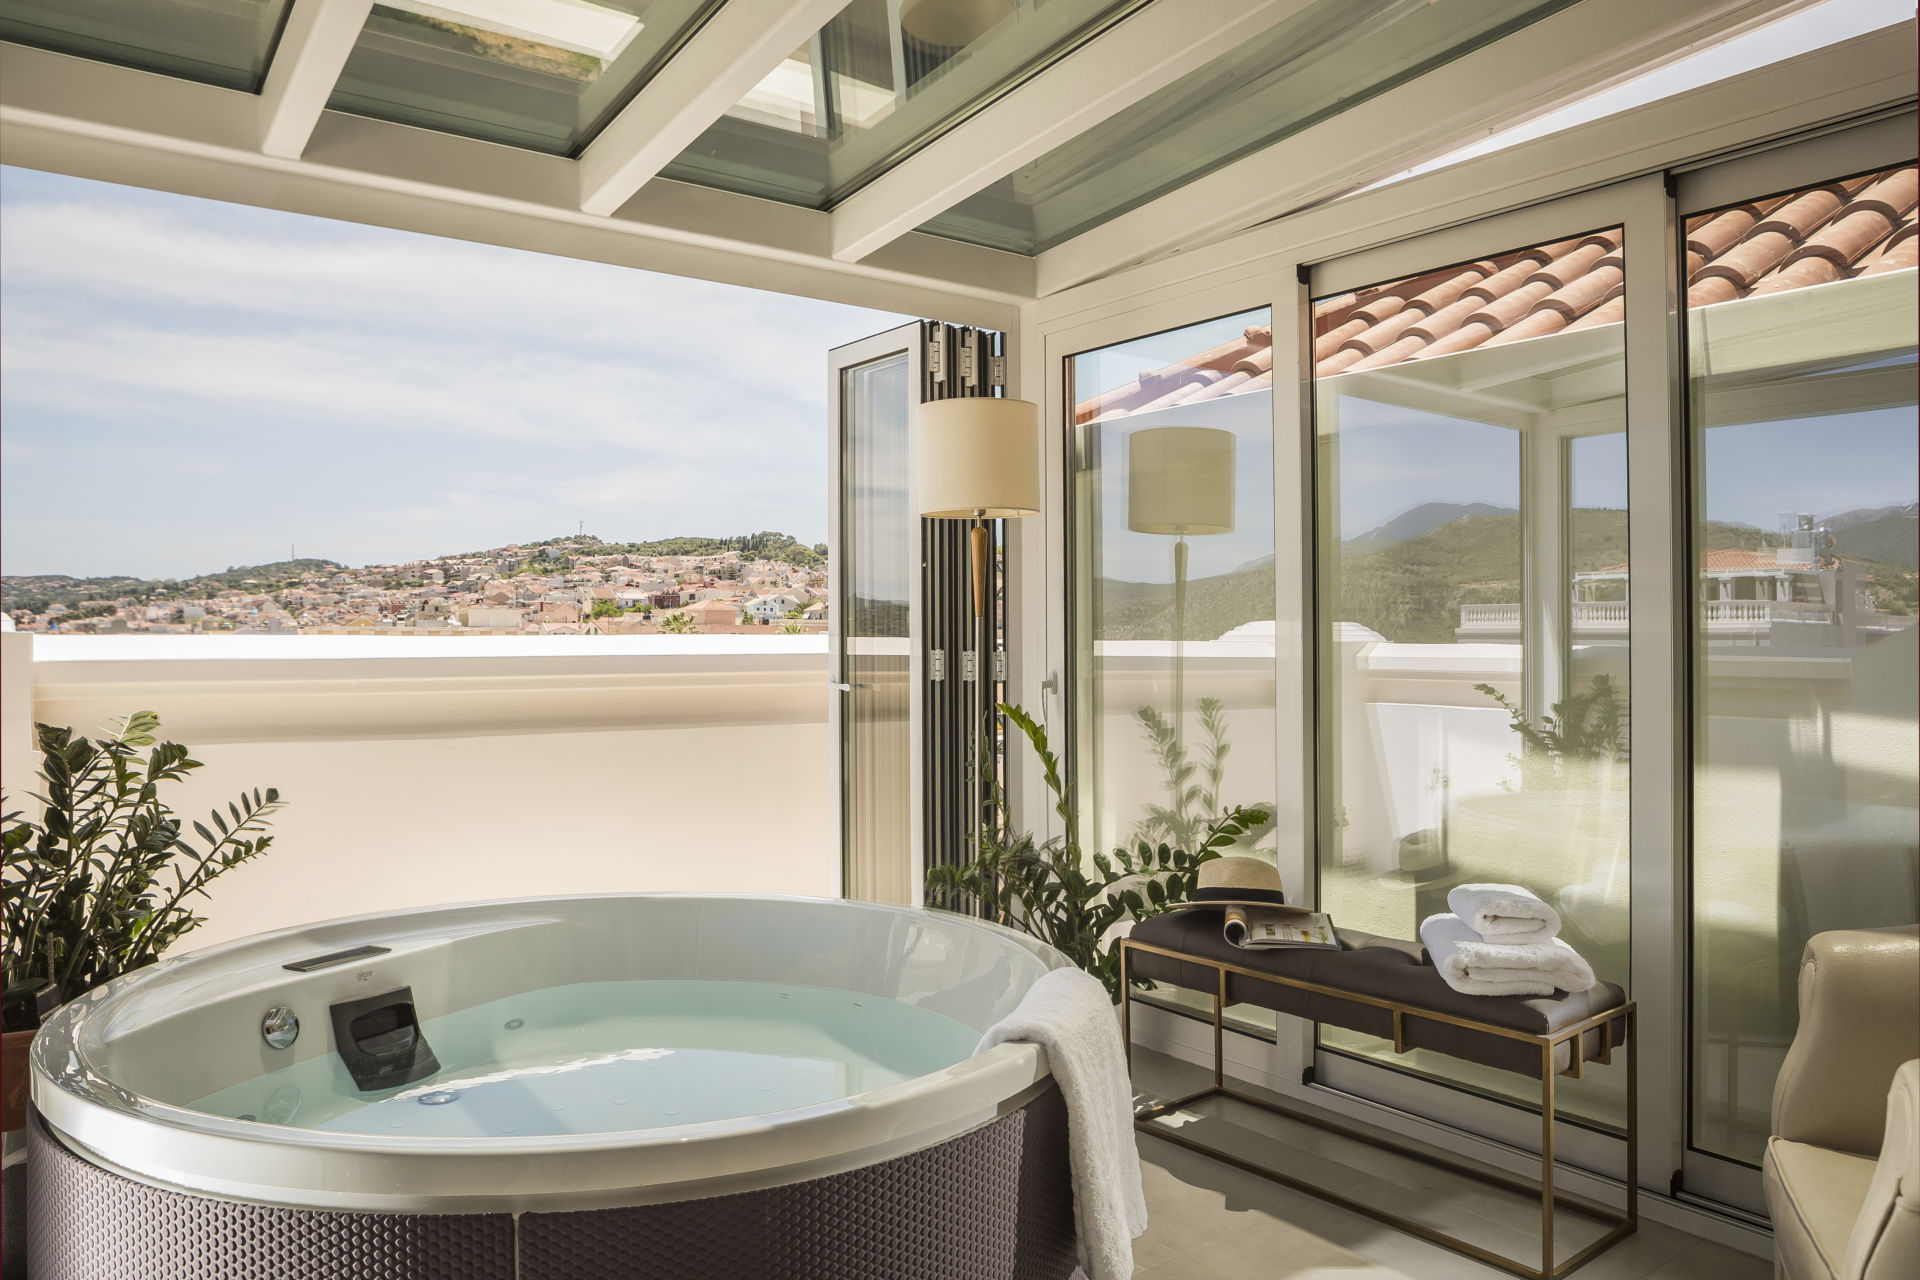 Penthouse Suite with Outdoor Hot Tub